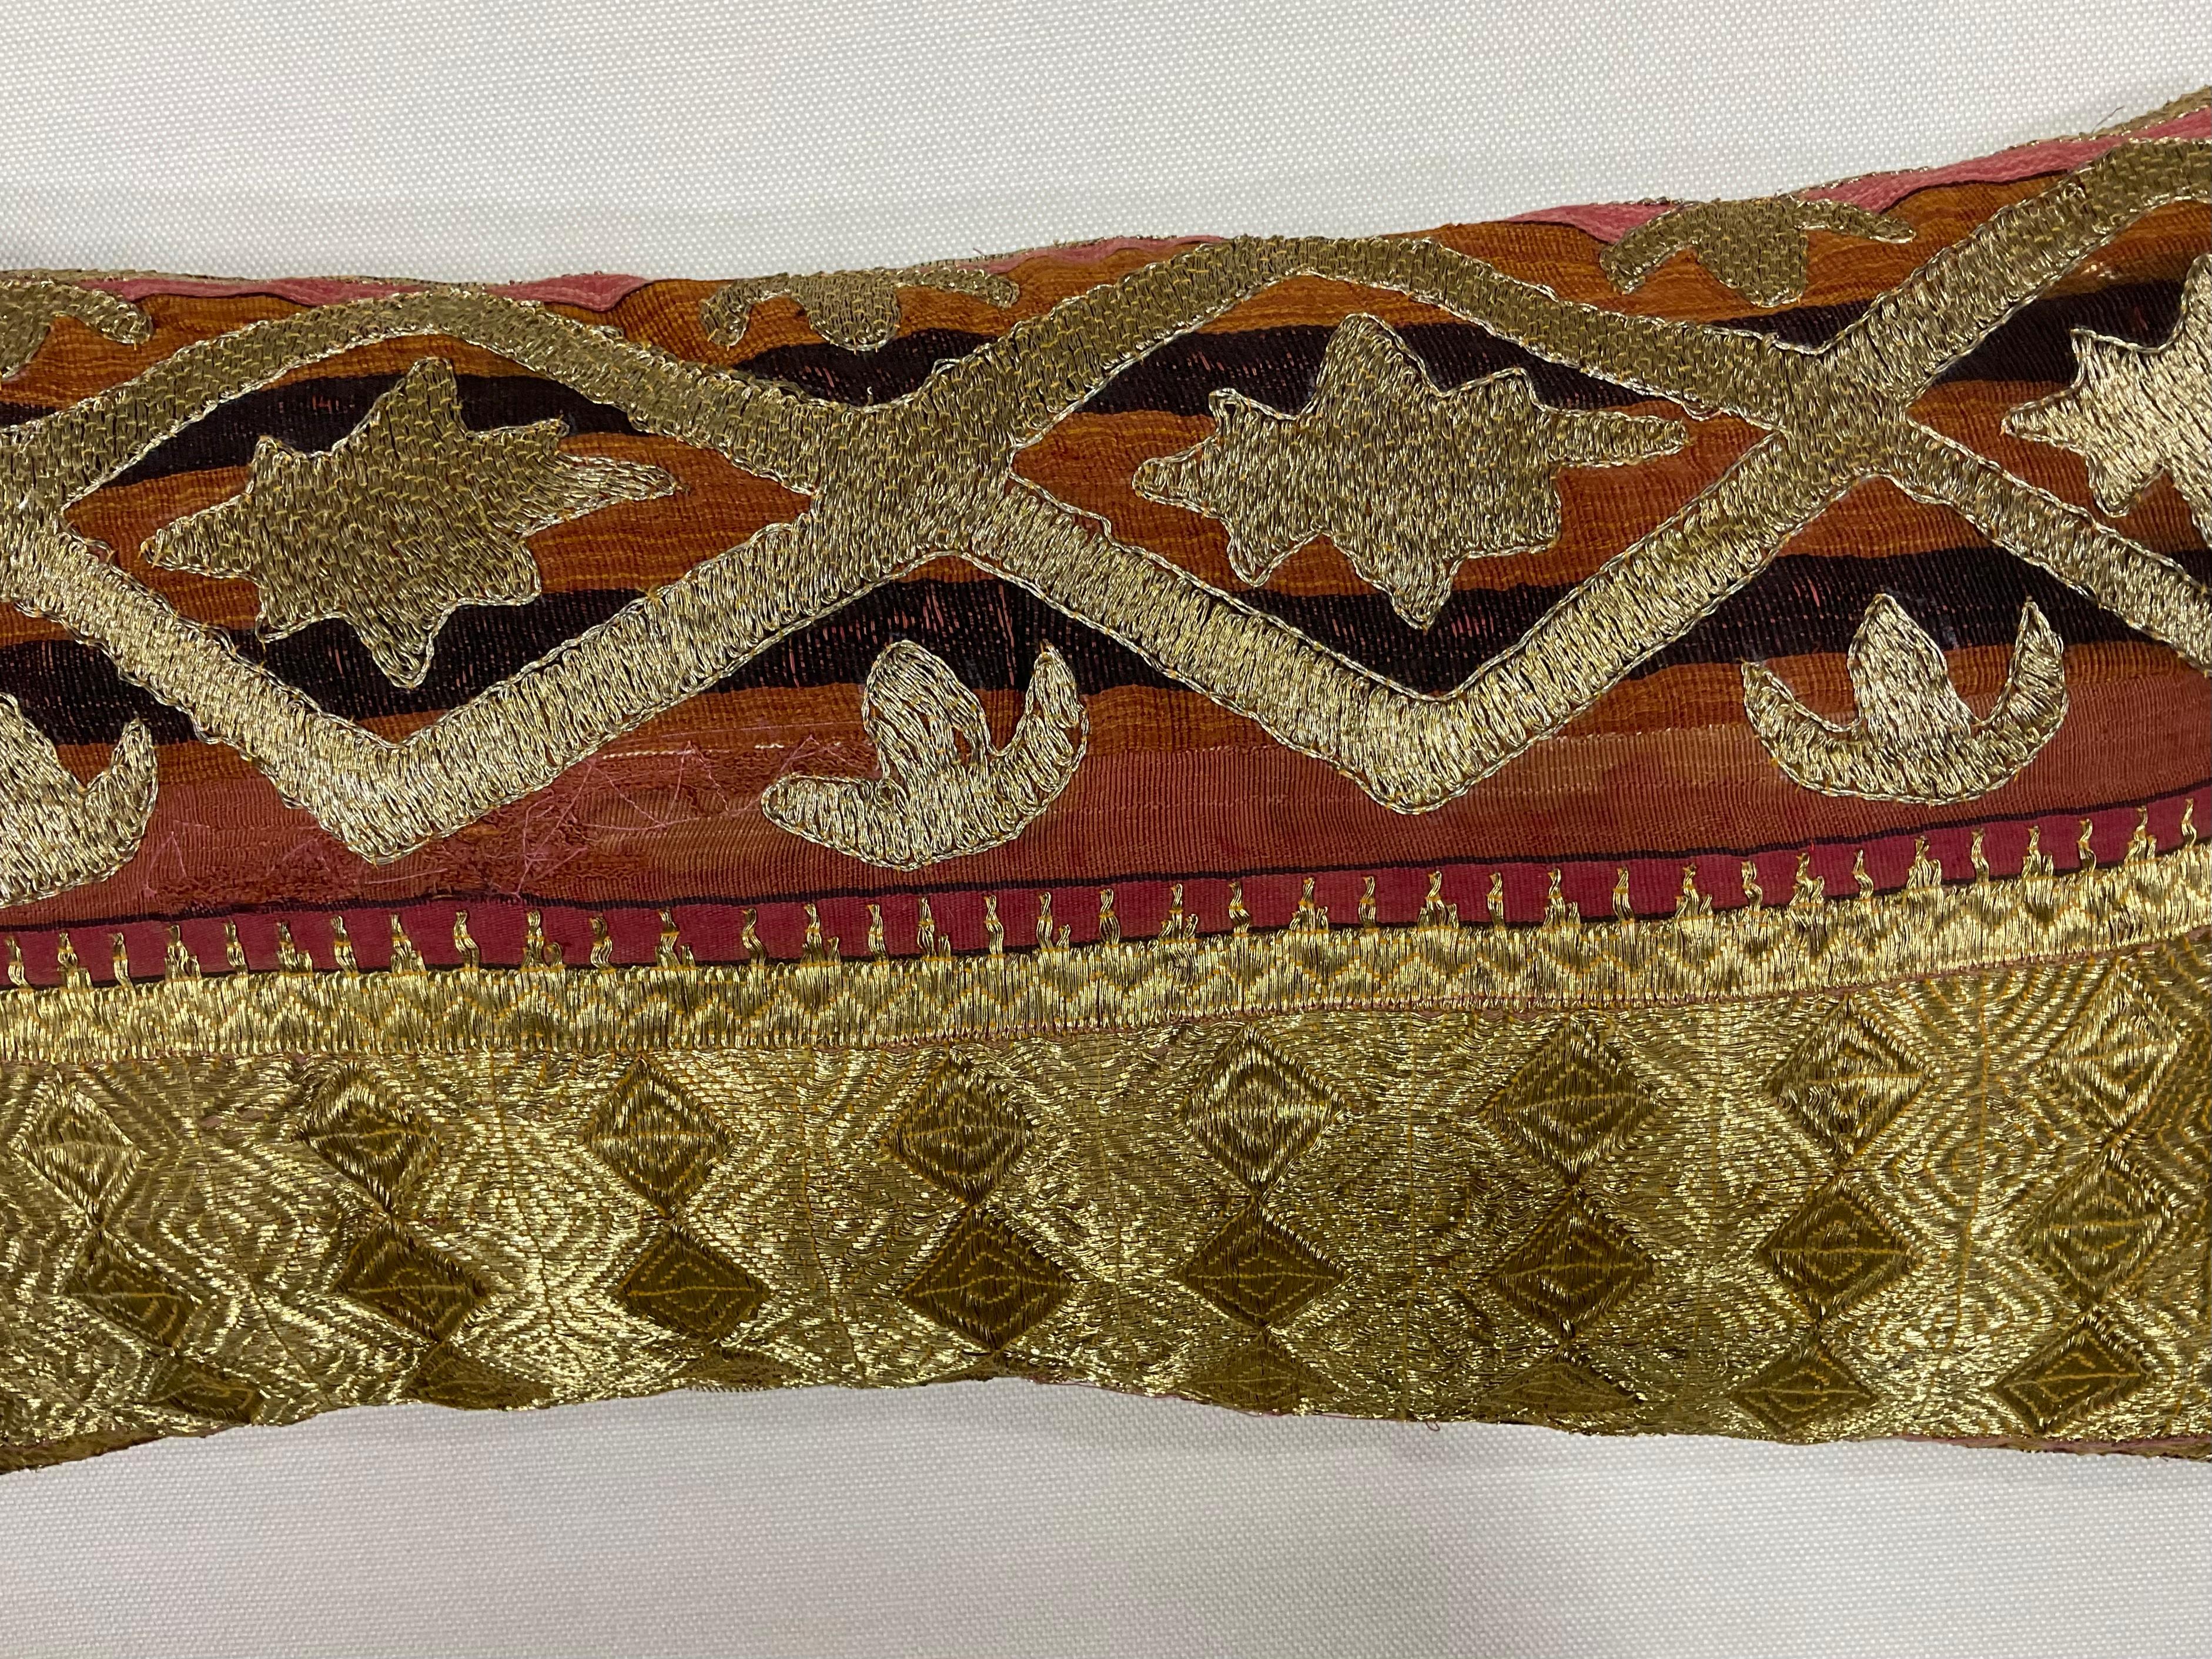 Exceptional pillow made of gold metallic thread embroidery on cotton foundation with beautiful artistic geometric motifs. Fine cotton backing. Salvaged from larger antique tribal textile.
Had some professional repair see photo.